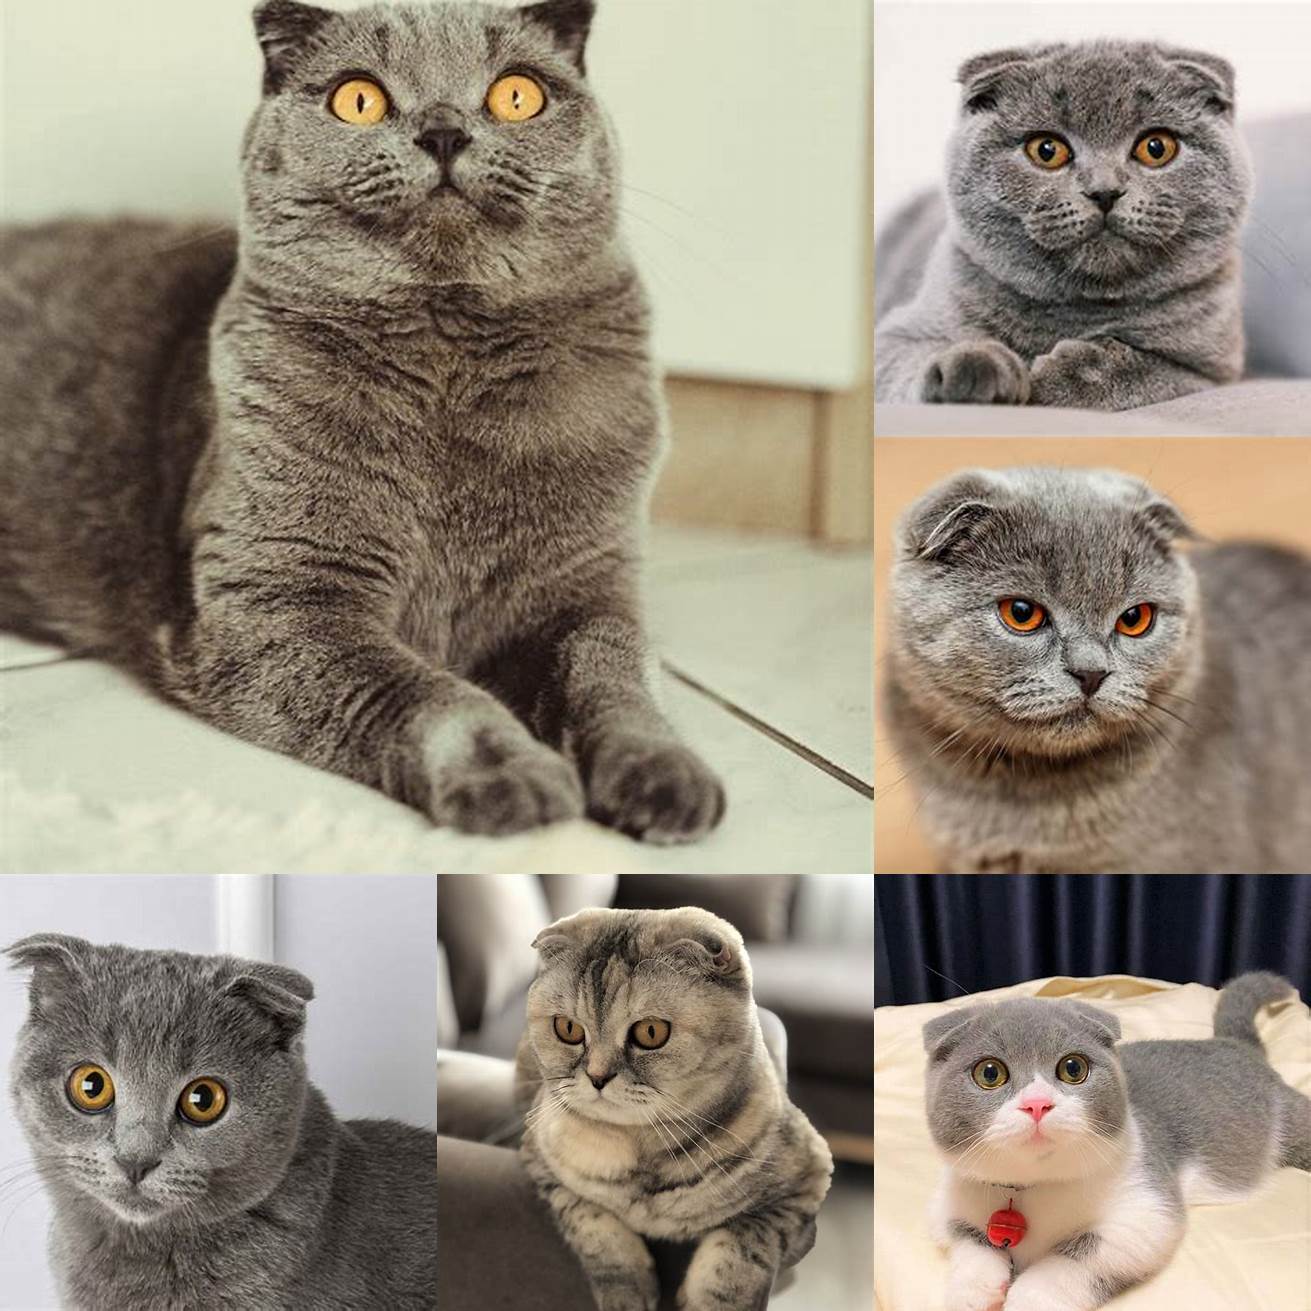 Scottish Fold cats are known for their calm and friendly personalities